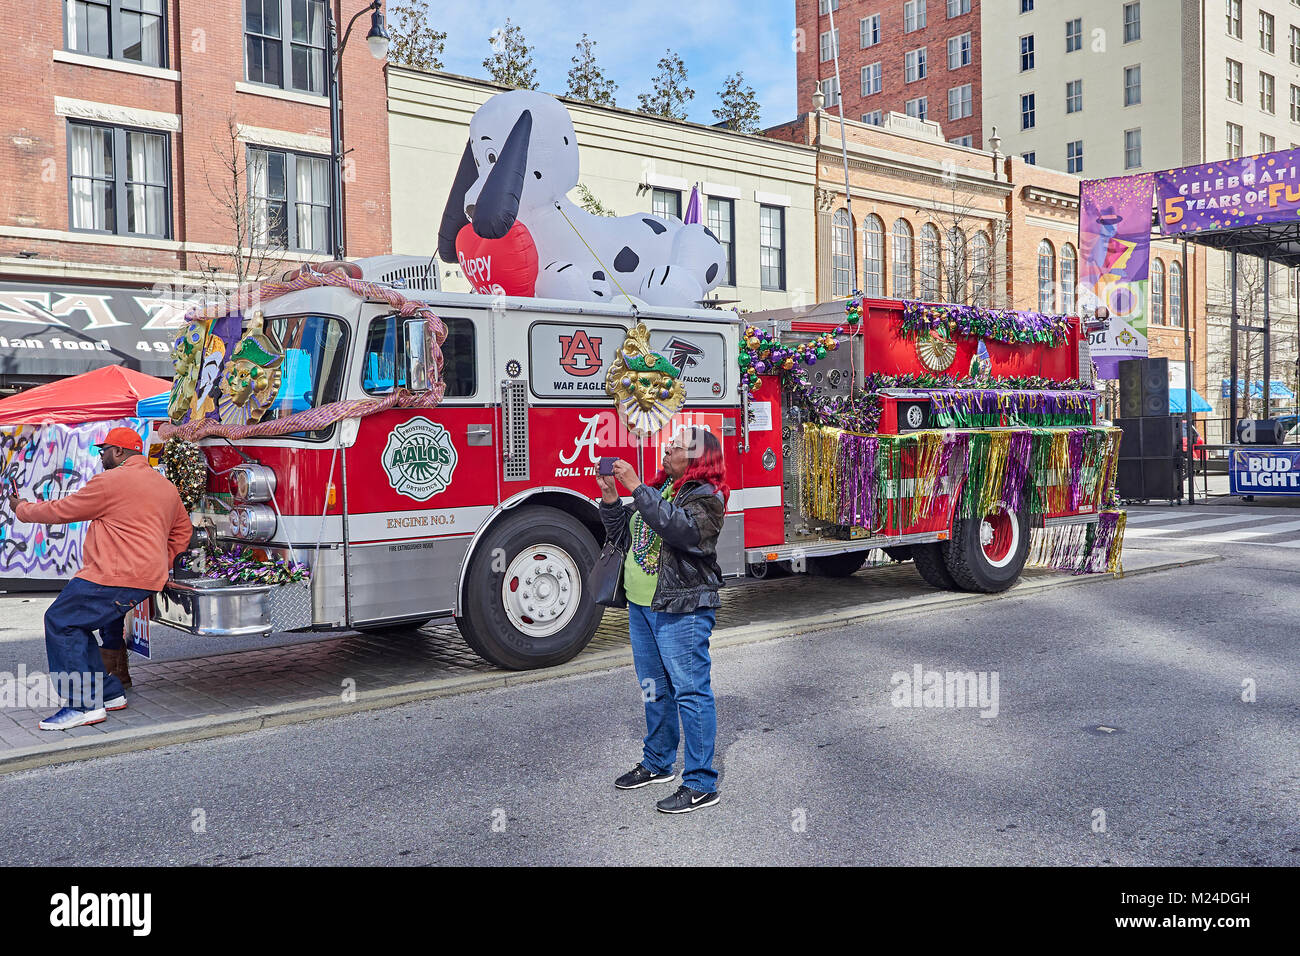 Two people taking pictures, one a selfie, at the local Mardi Gras celebration with a decorated fire truck in background in Montgomelry Alabama, USA. Stock Photo